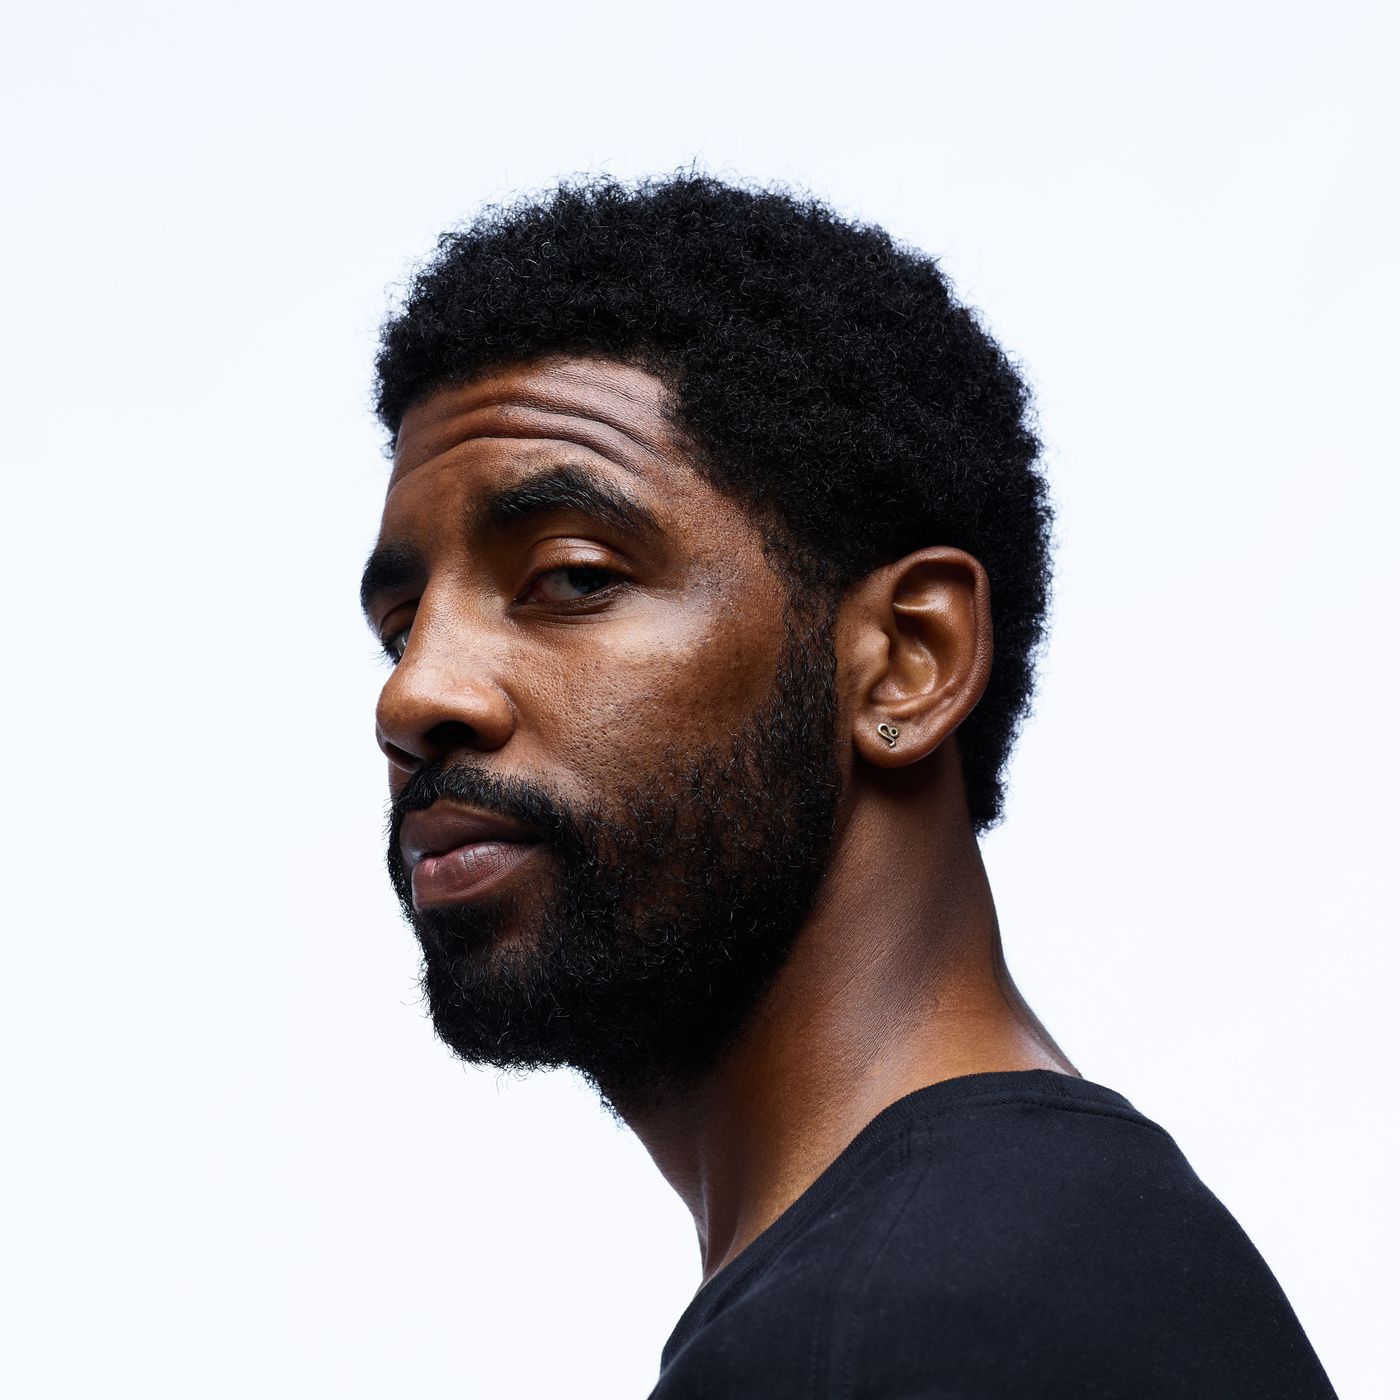 Kyrie Irving's Instagram Profile Wants To Help You Expand Your Mind